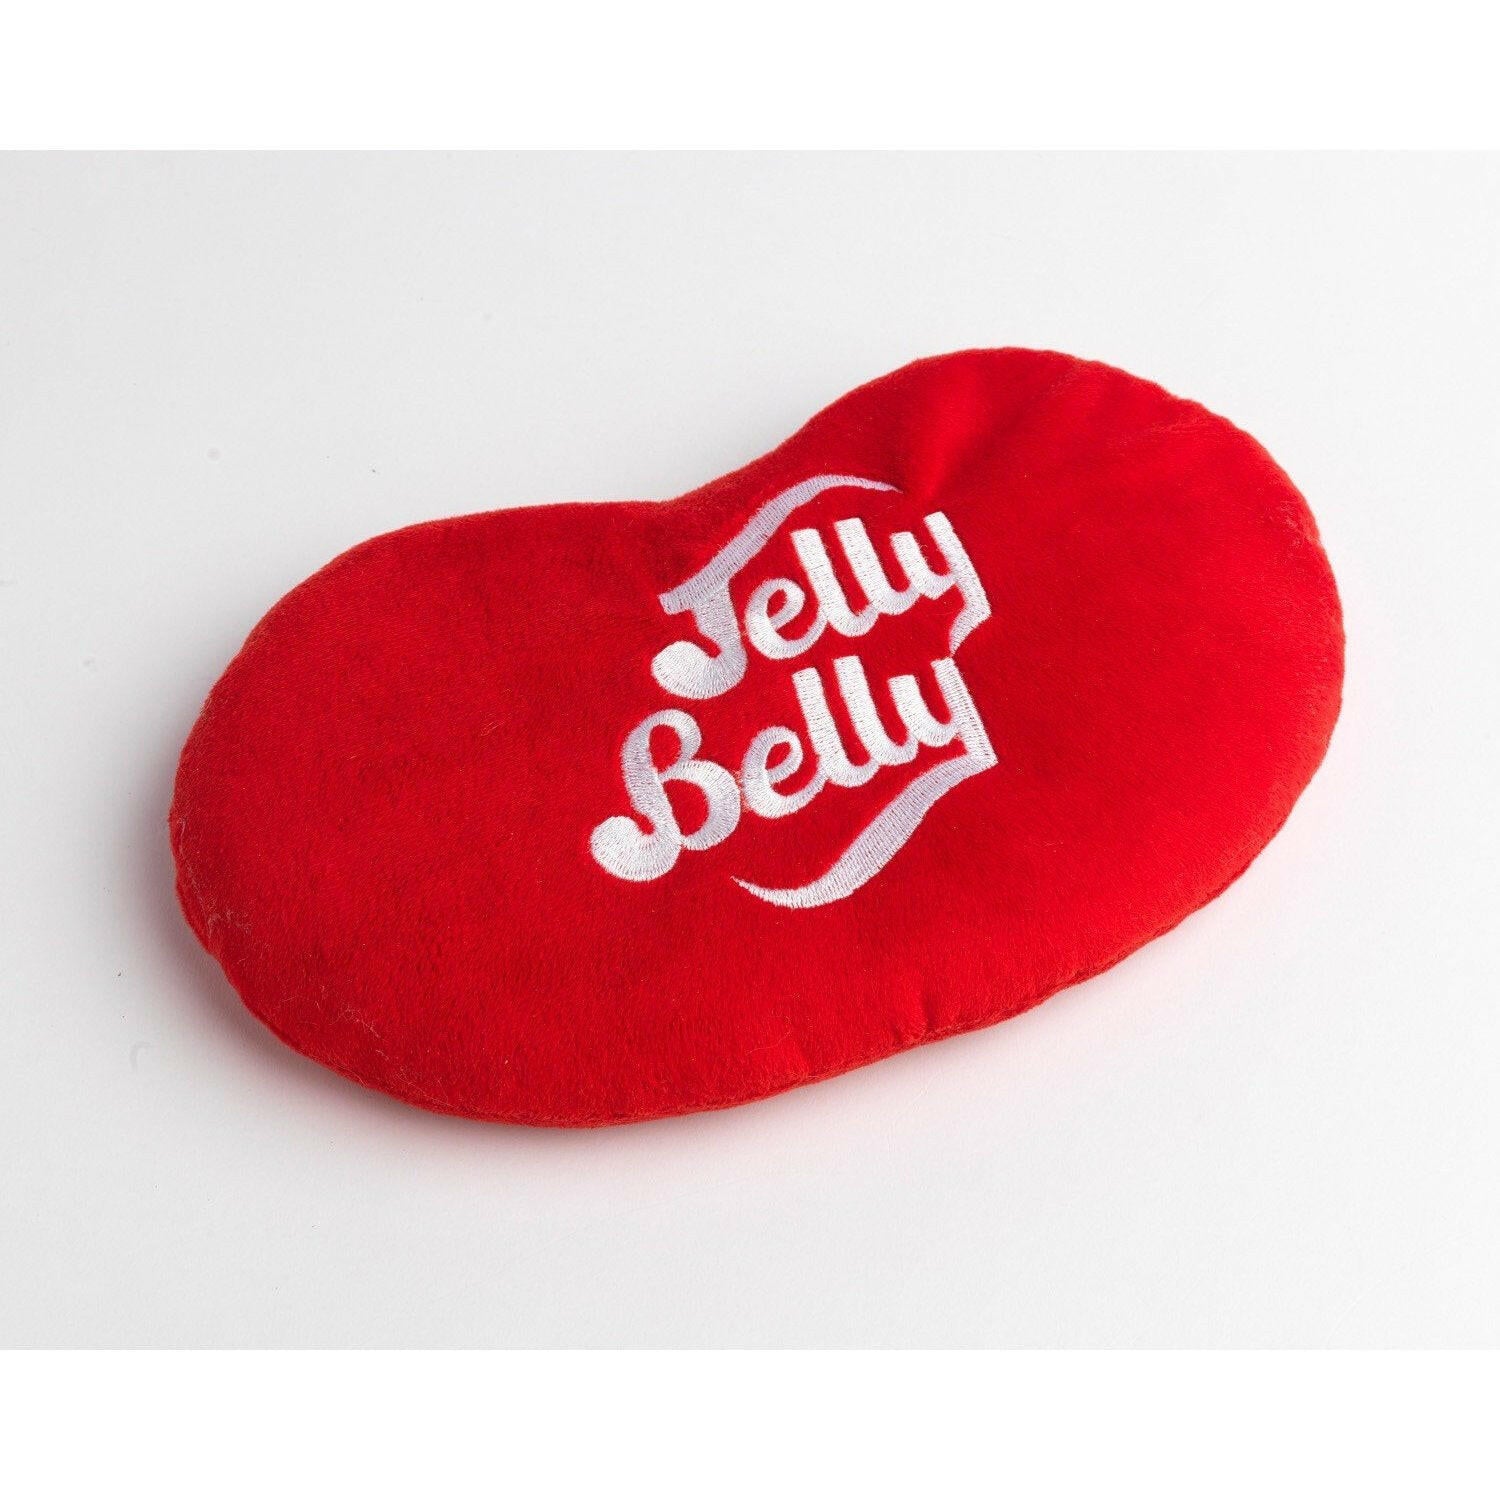 Jelly Belly Microwavable Cushion